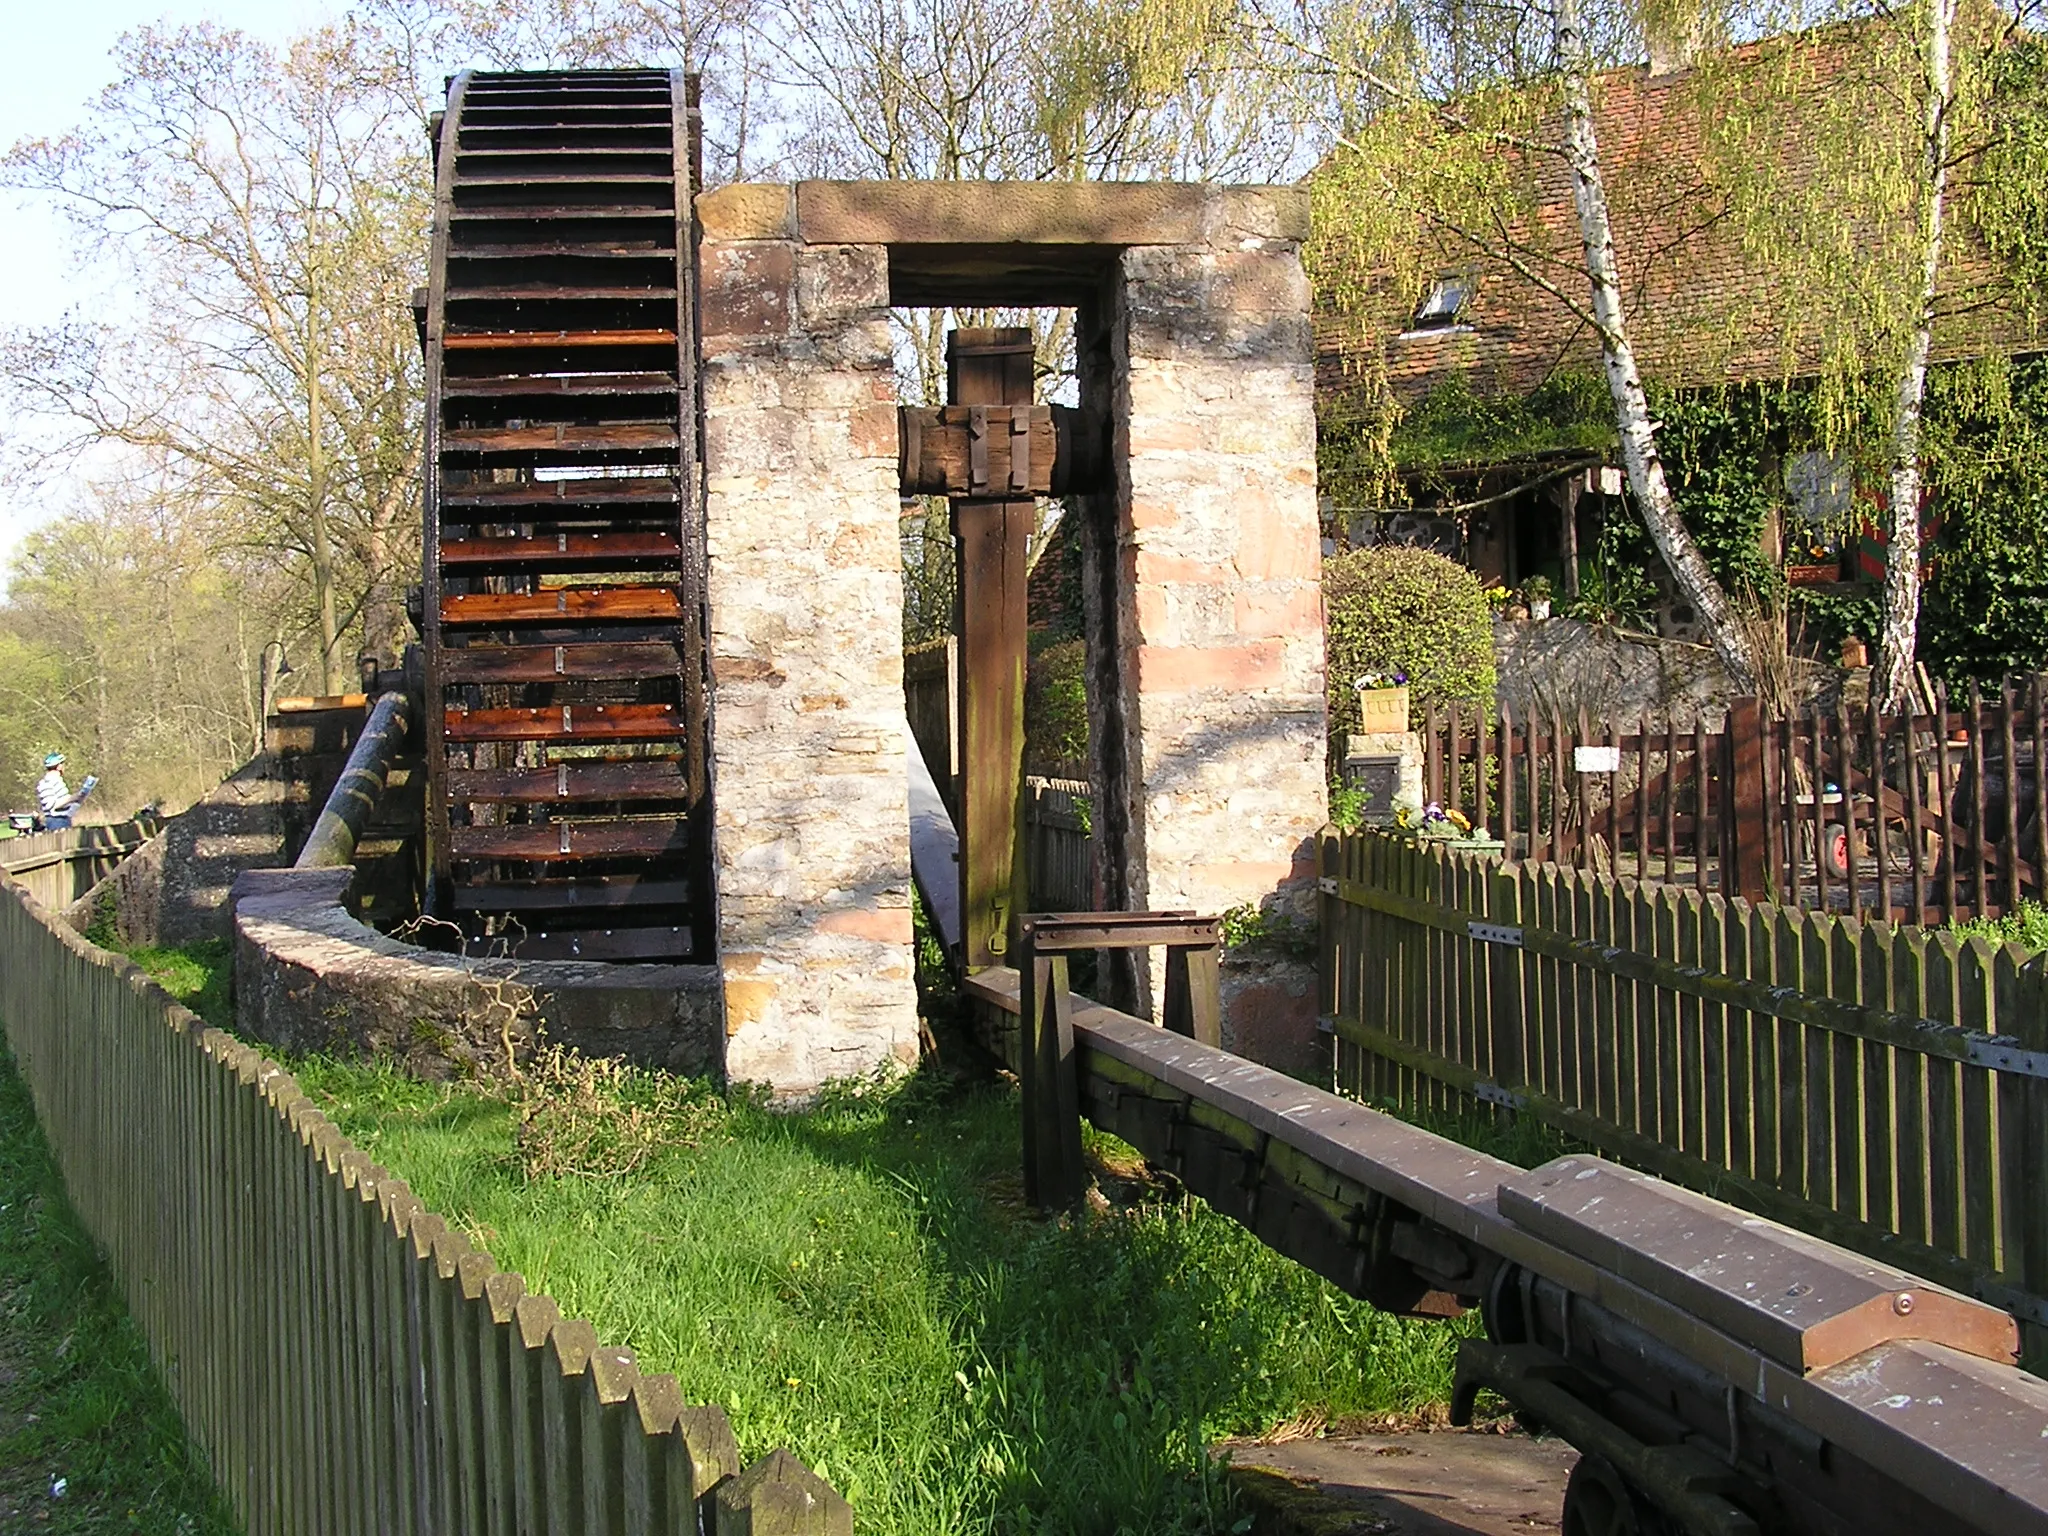 Photo showing: Water wheel at Bad Nauheim-Schwalheim, powered by the Wetter. The wheel run the pumps at the graduation towers in Bad Nauheim by moving a bar.